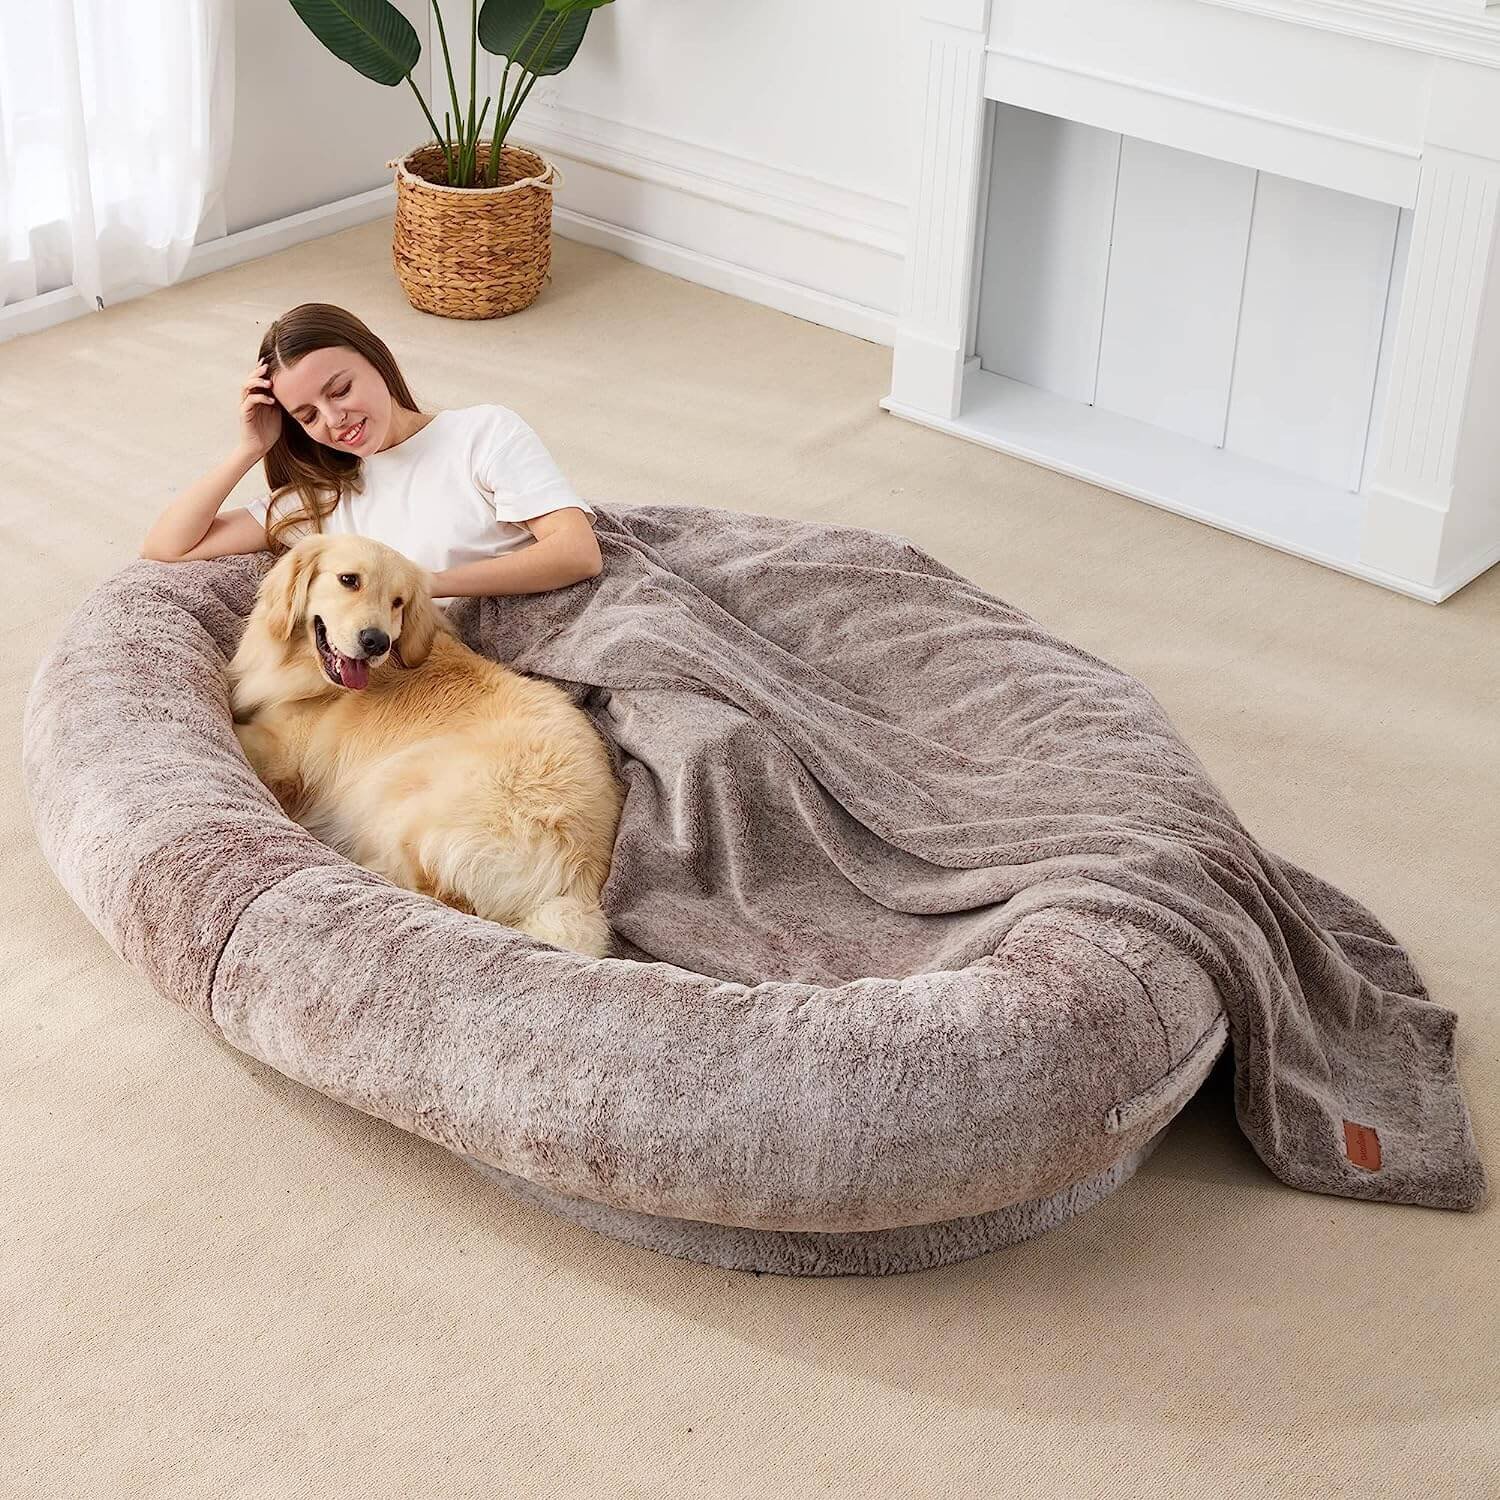 Combine Health and Happiness with Large Bean Bag Beds